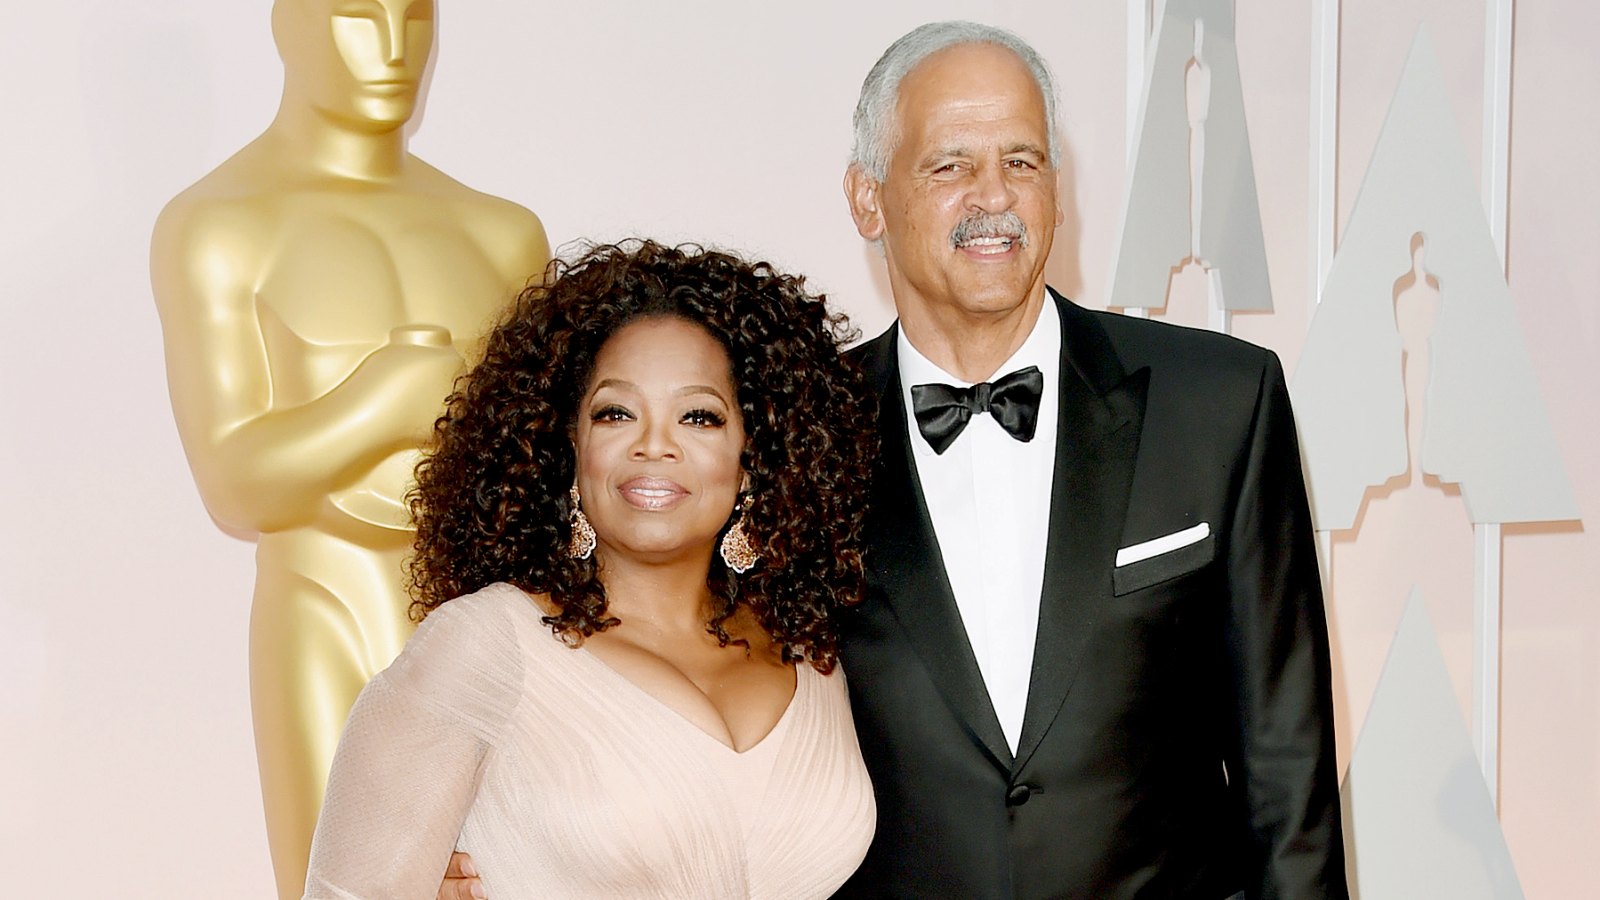 Oprah Winfrey and Stedman Graham attend the 87th Annual Academy Awards at Hollywood & Highland Center on February 22, 2015 in Hollywood, California.